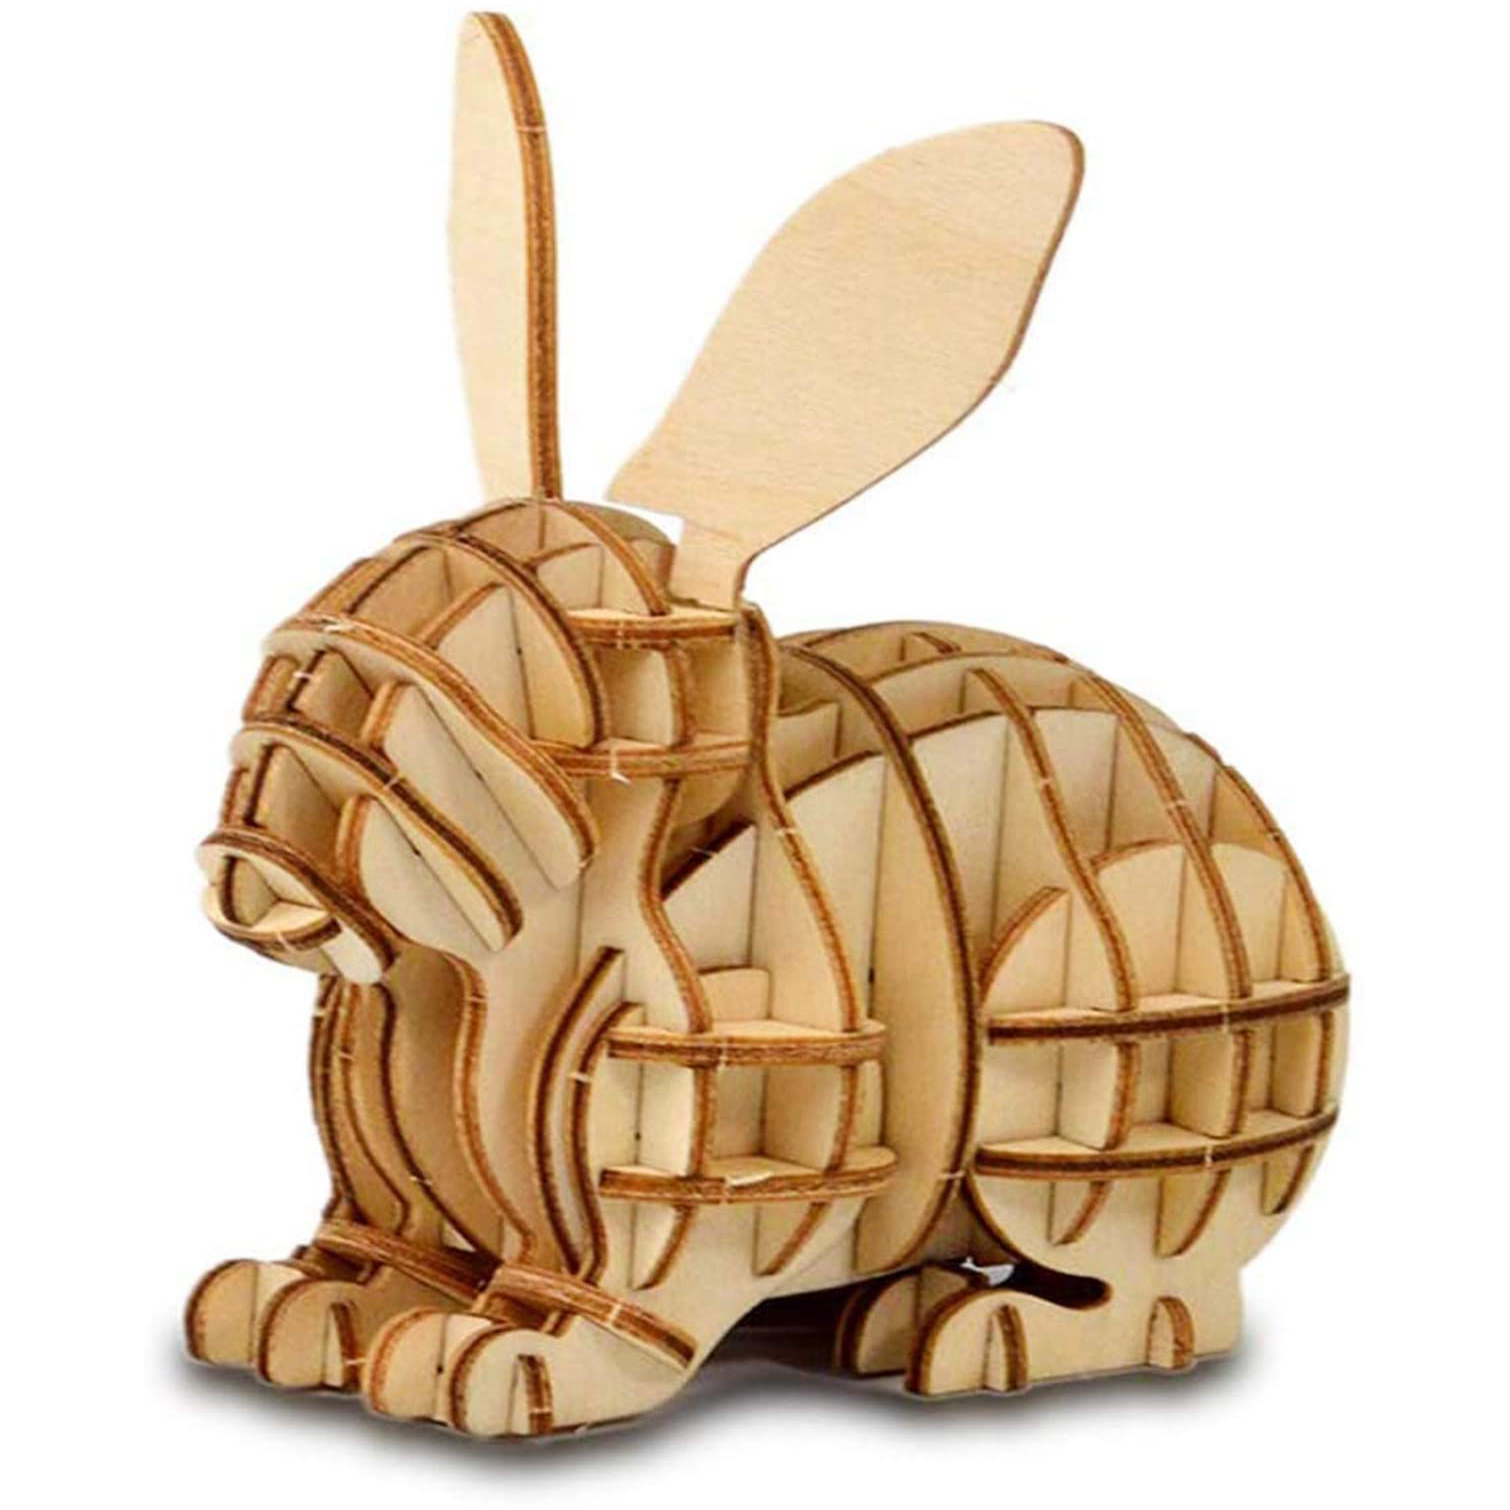 3D Wooden Puzzle Toys for Kids Adults Wooden Animal Rabbit Model Puzzle, Mechanical Puzzles Jigsaw Puzzle Toys Model Kits Assemble Puzzle Educational Toys Gifts for Kids Adults Boys Girls - image 1 of 9